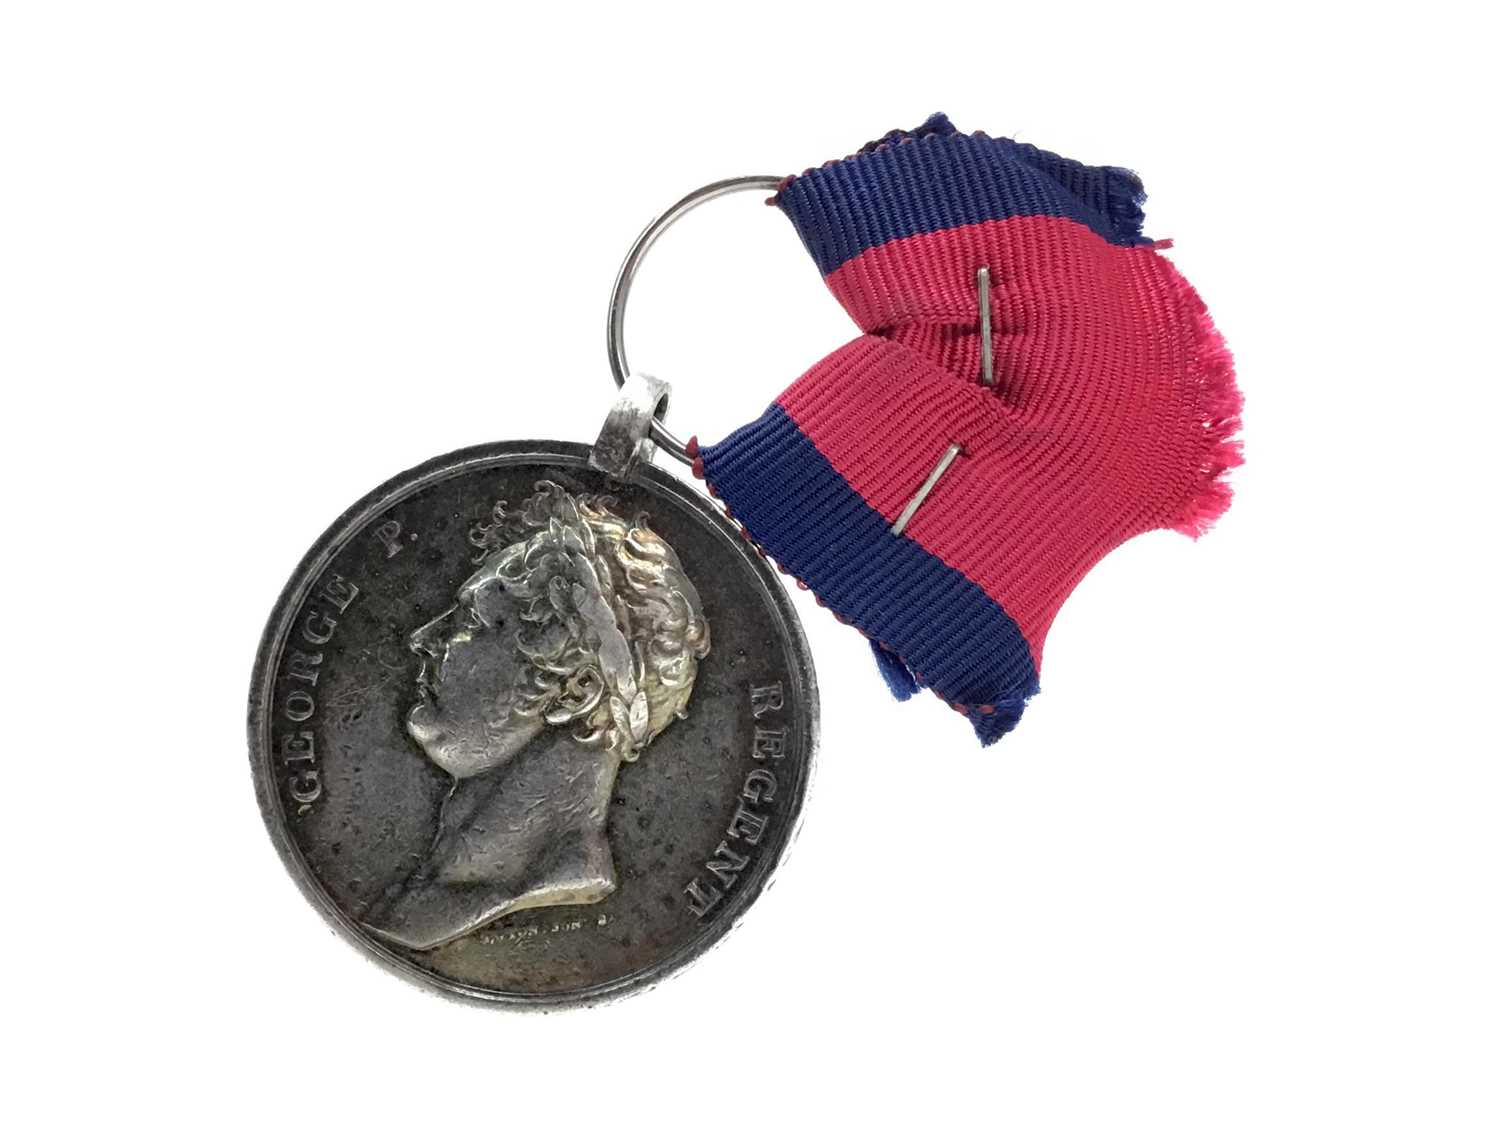 Lot 1431 - AN 1815 WATERLOO MEDAL AWARDED TO RICHARD ROOKE